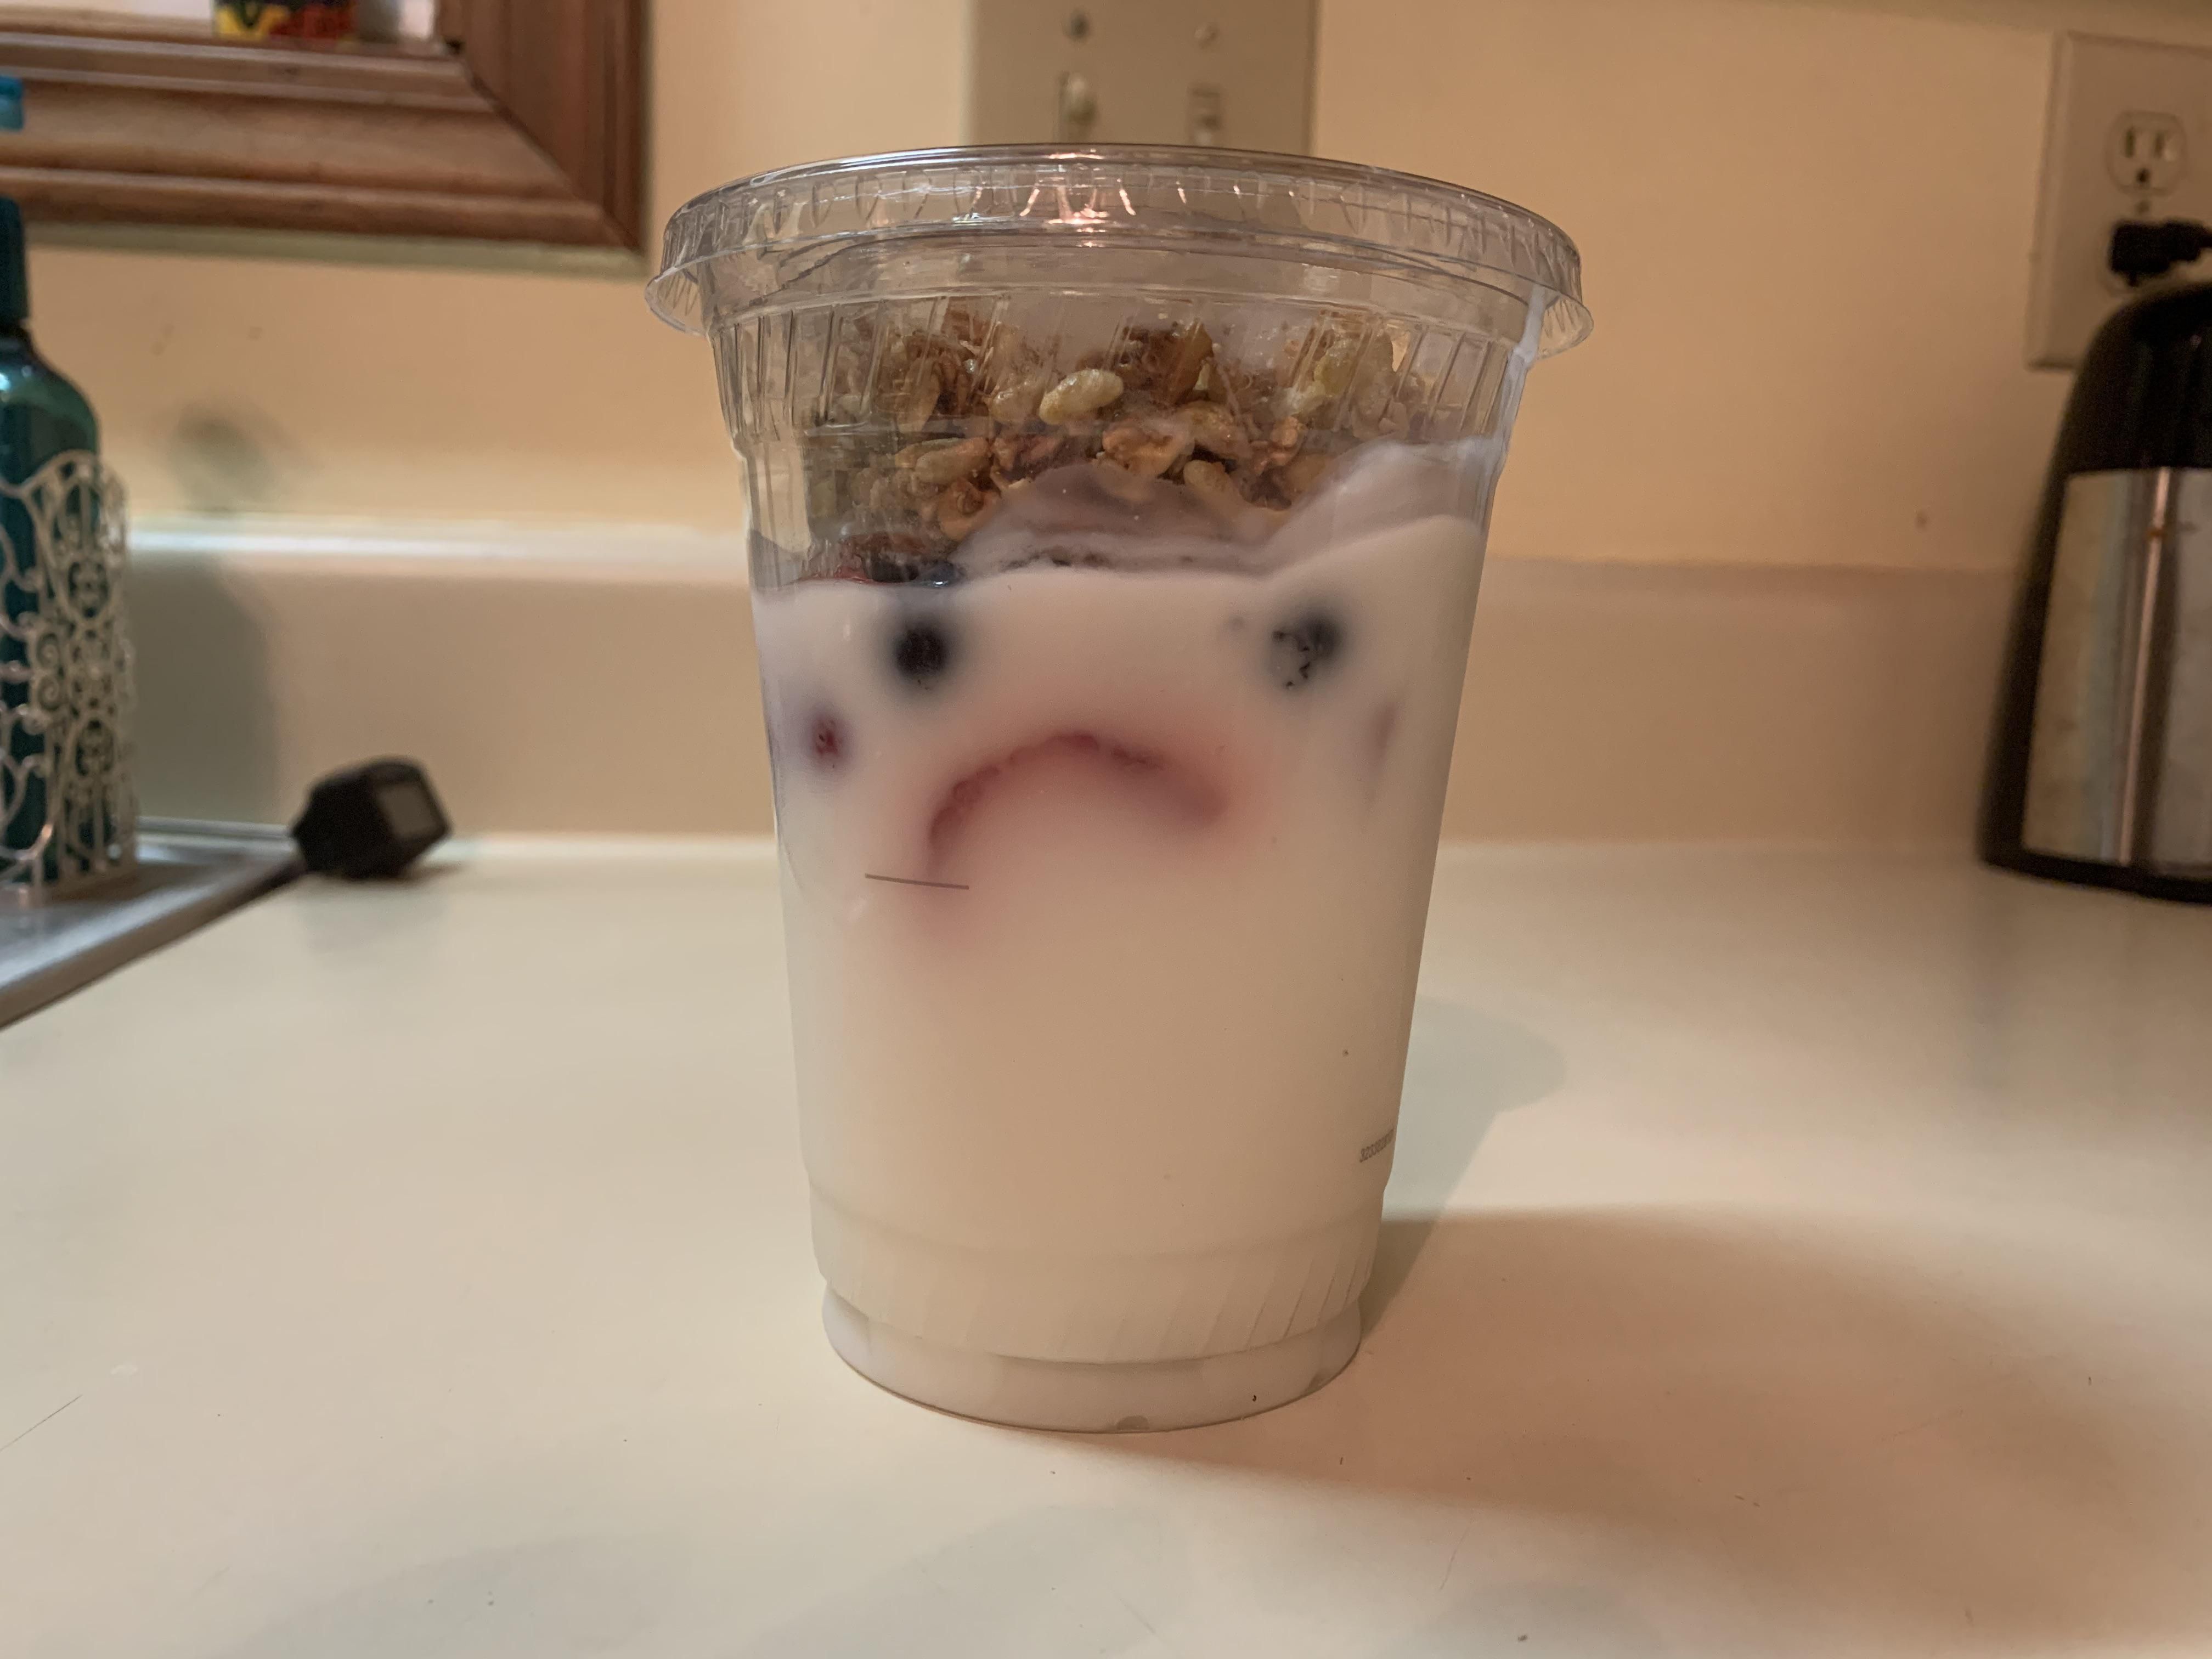 I wonder what my parfait is mad about :(